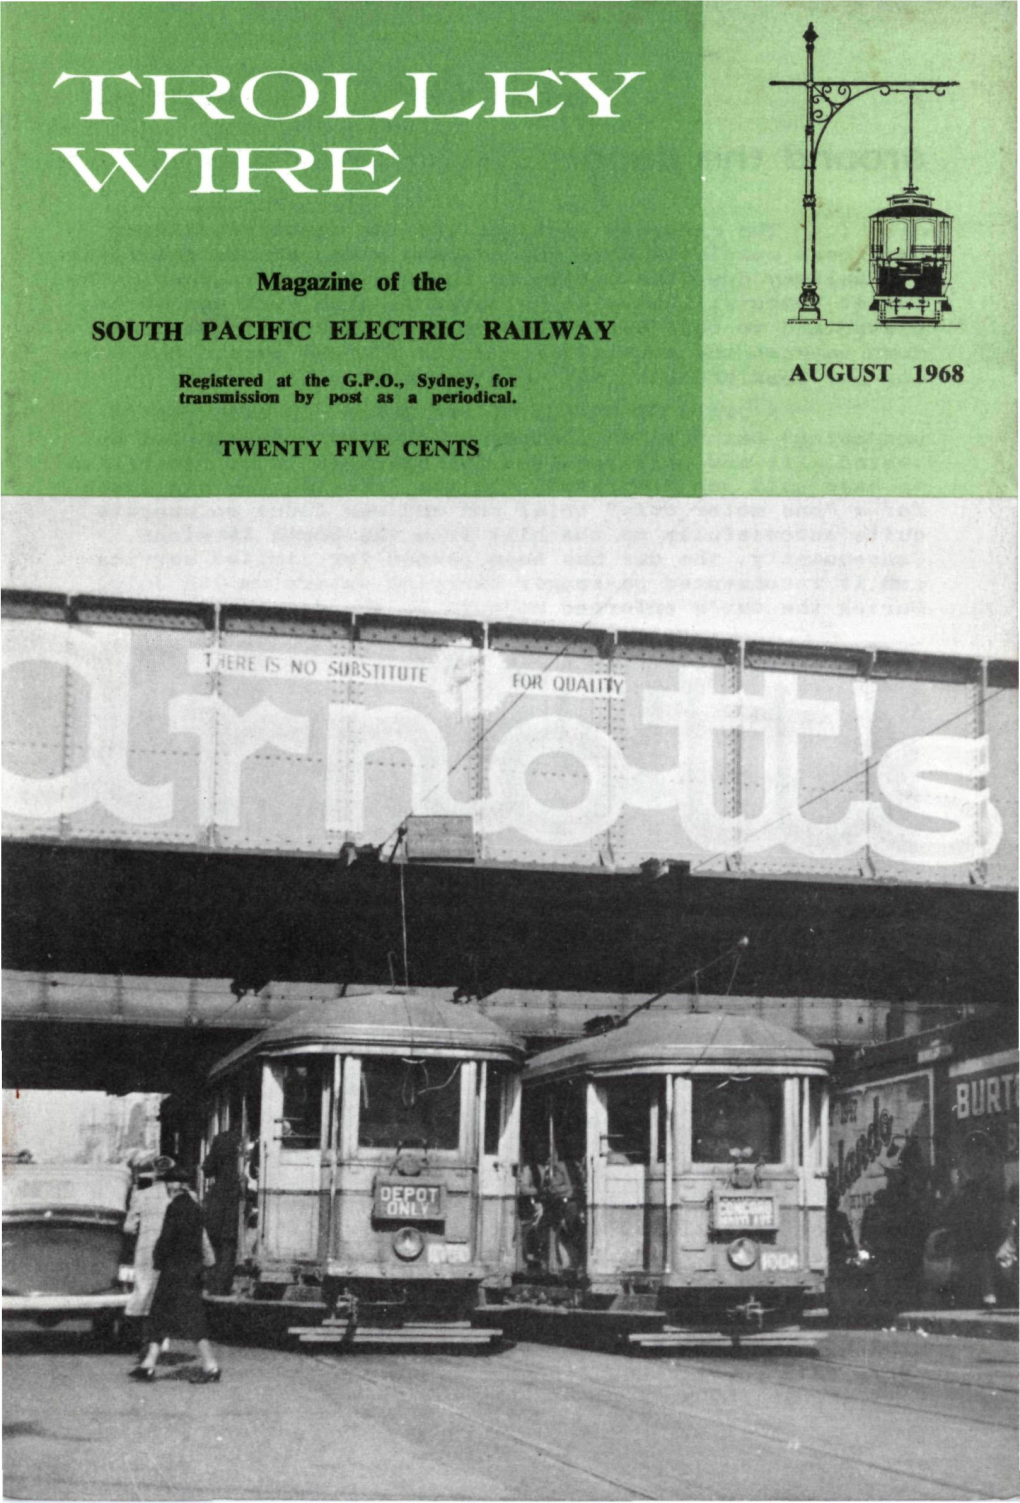 Magazine of the SOUTH PACIFIC ELECTRIC RAILWAY AUGUST 1968